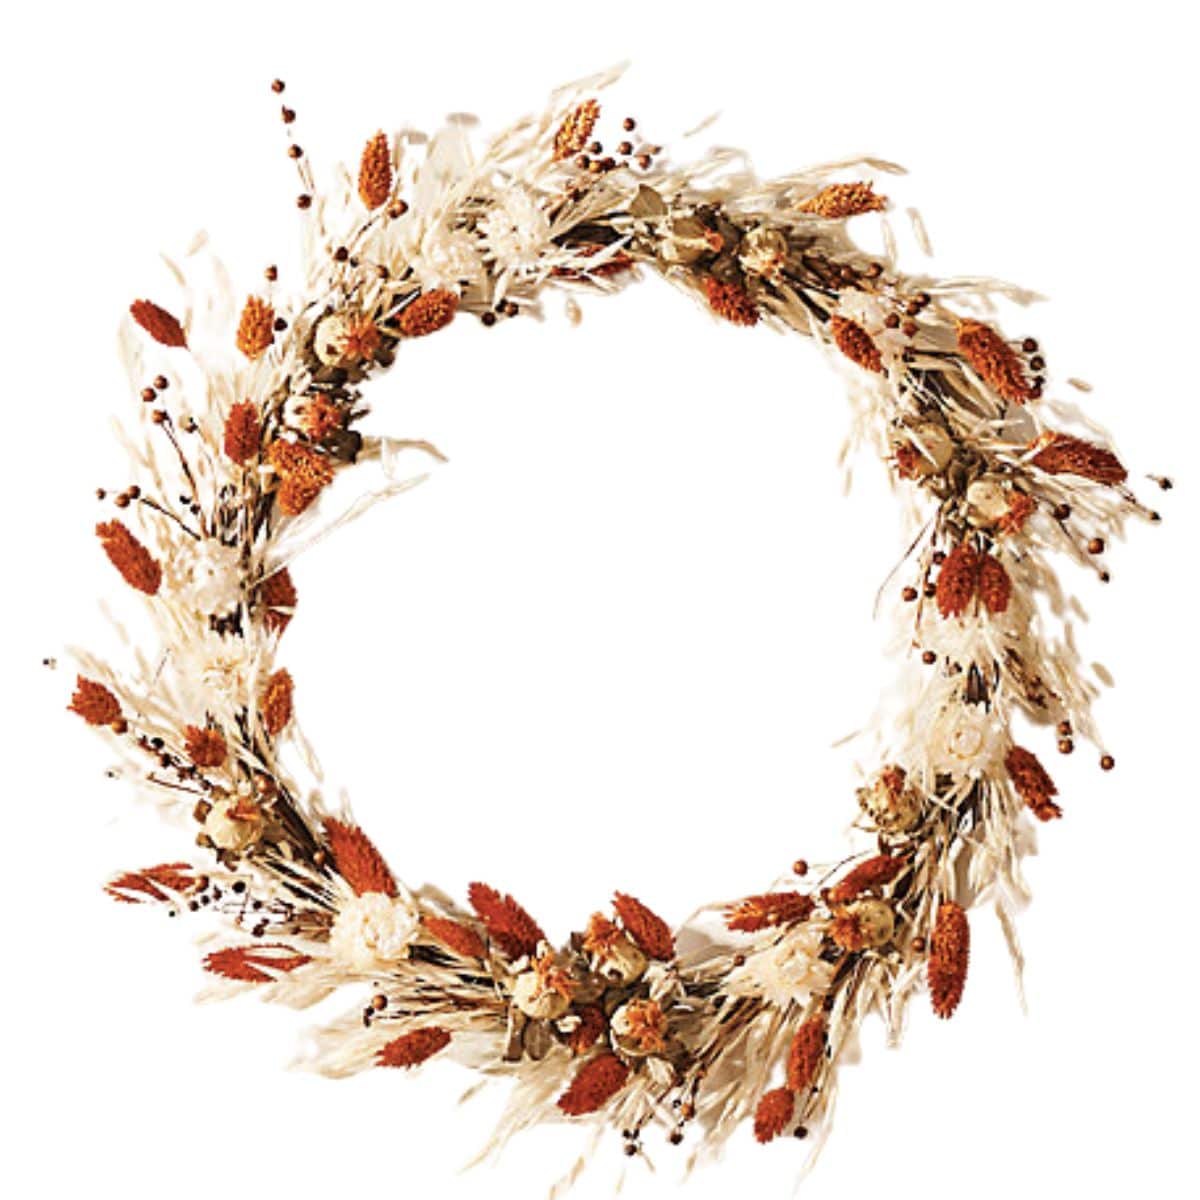 Wreath made of Bleached oats, safflower blooms, and cream strawflower from terrain.